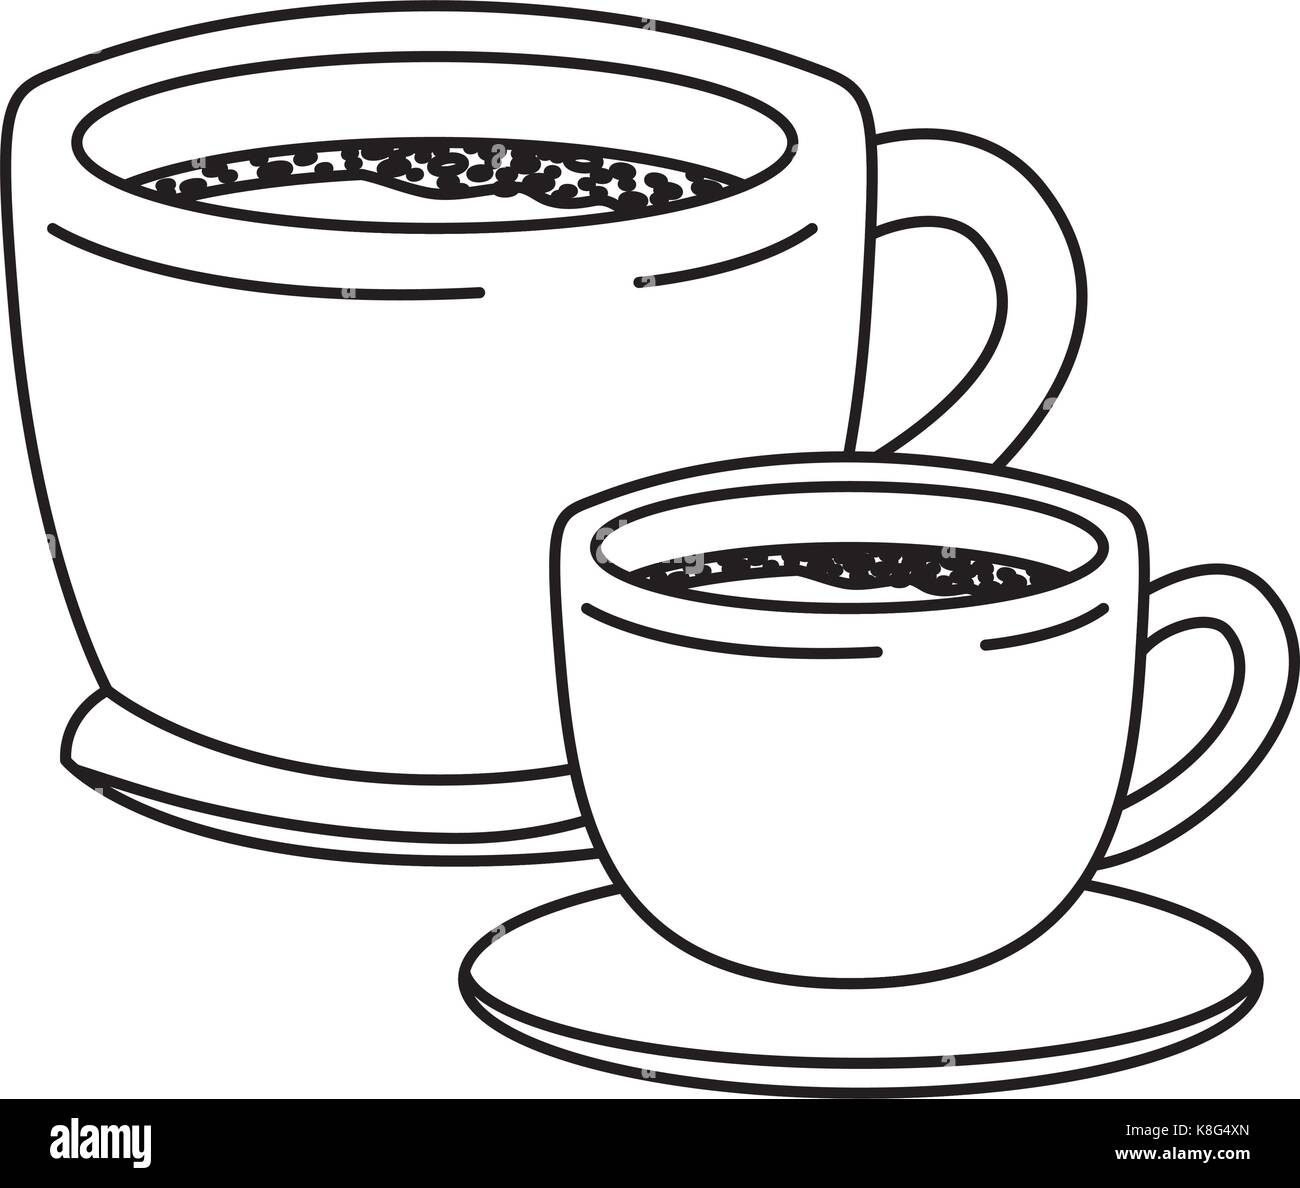 https://c8.alamy.com/comp/K8G4XN/set-big-and-small-cup-of-coffee-with-handle-monochrome-silhouette-K8G4XN.jpg